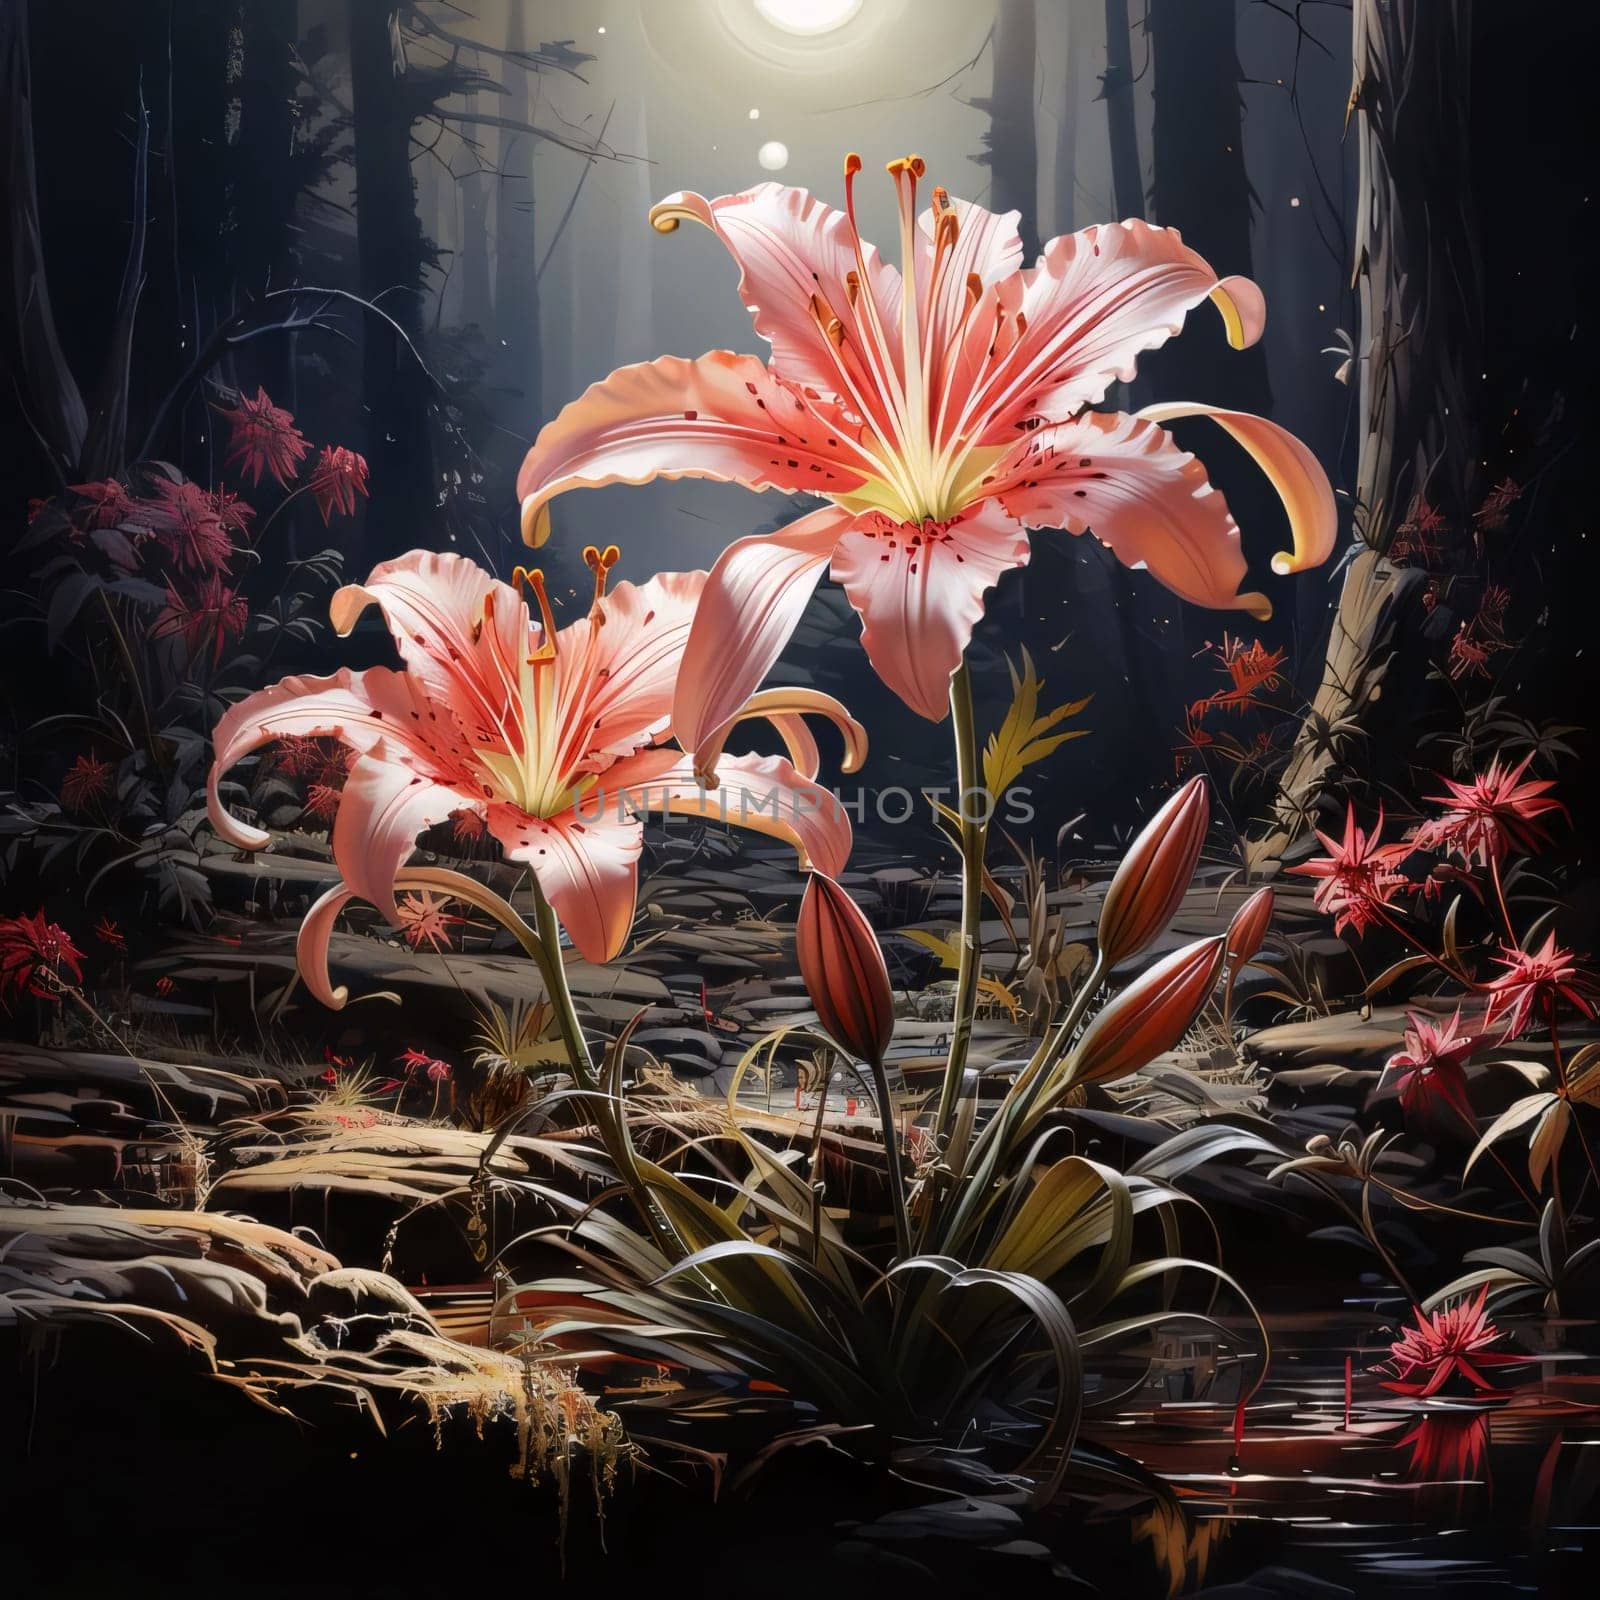 Illustration of pink lily flowers in the middle of a dark forest at night, in the sky, moonlight. Flowering flowers, a symbol of spring, new life. A joyful time of nature waking up to life.